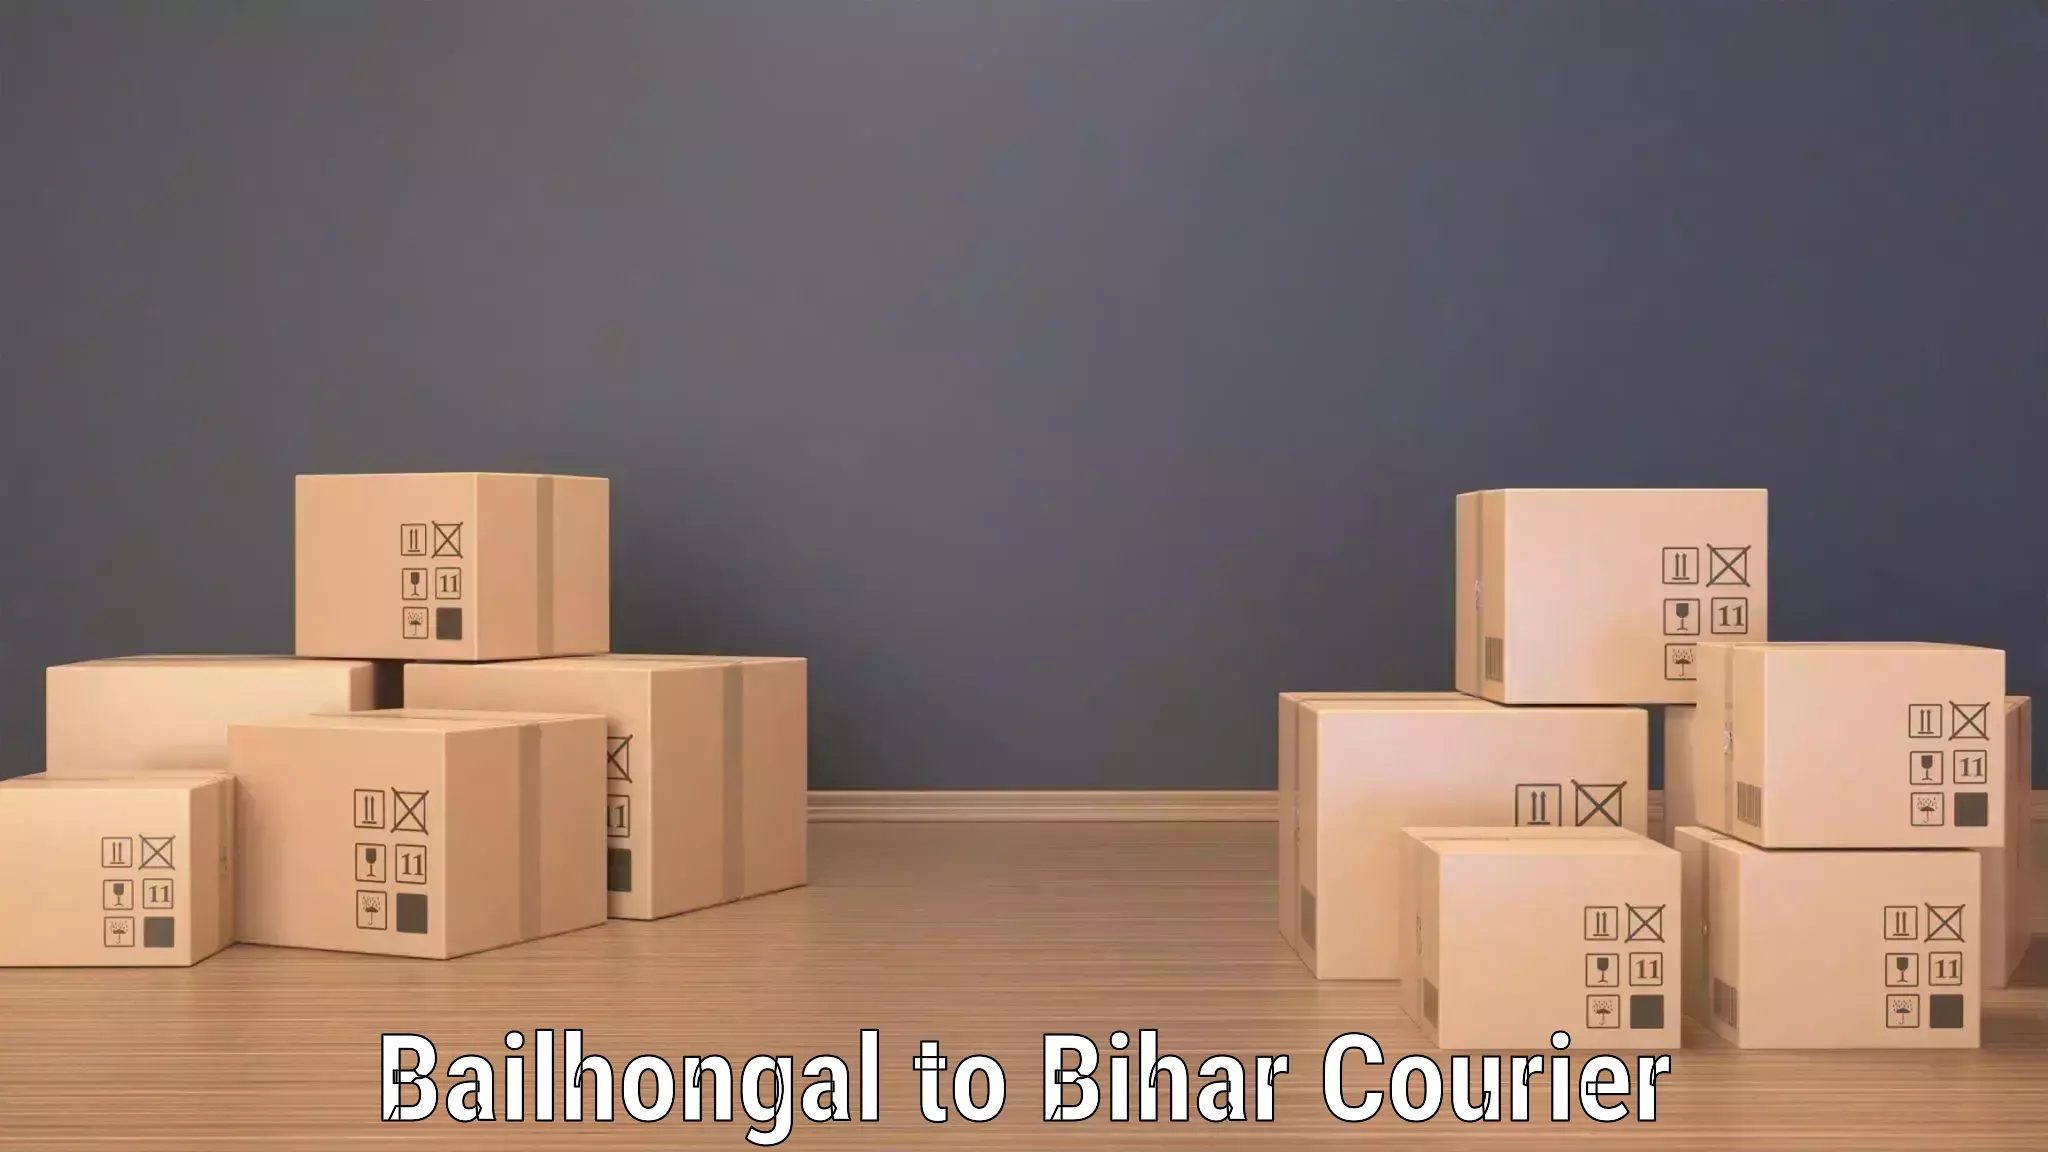 Same-day delivery options Bailhongal to Patna